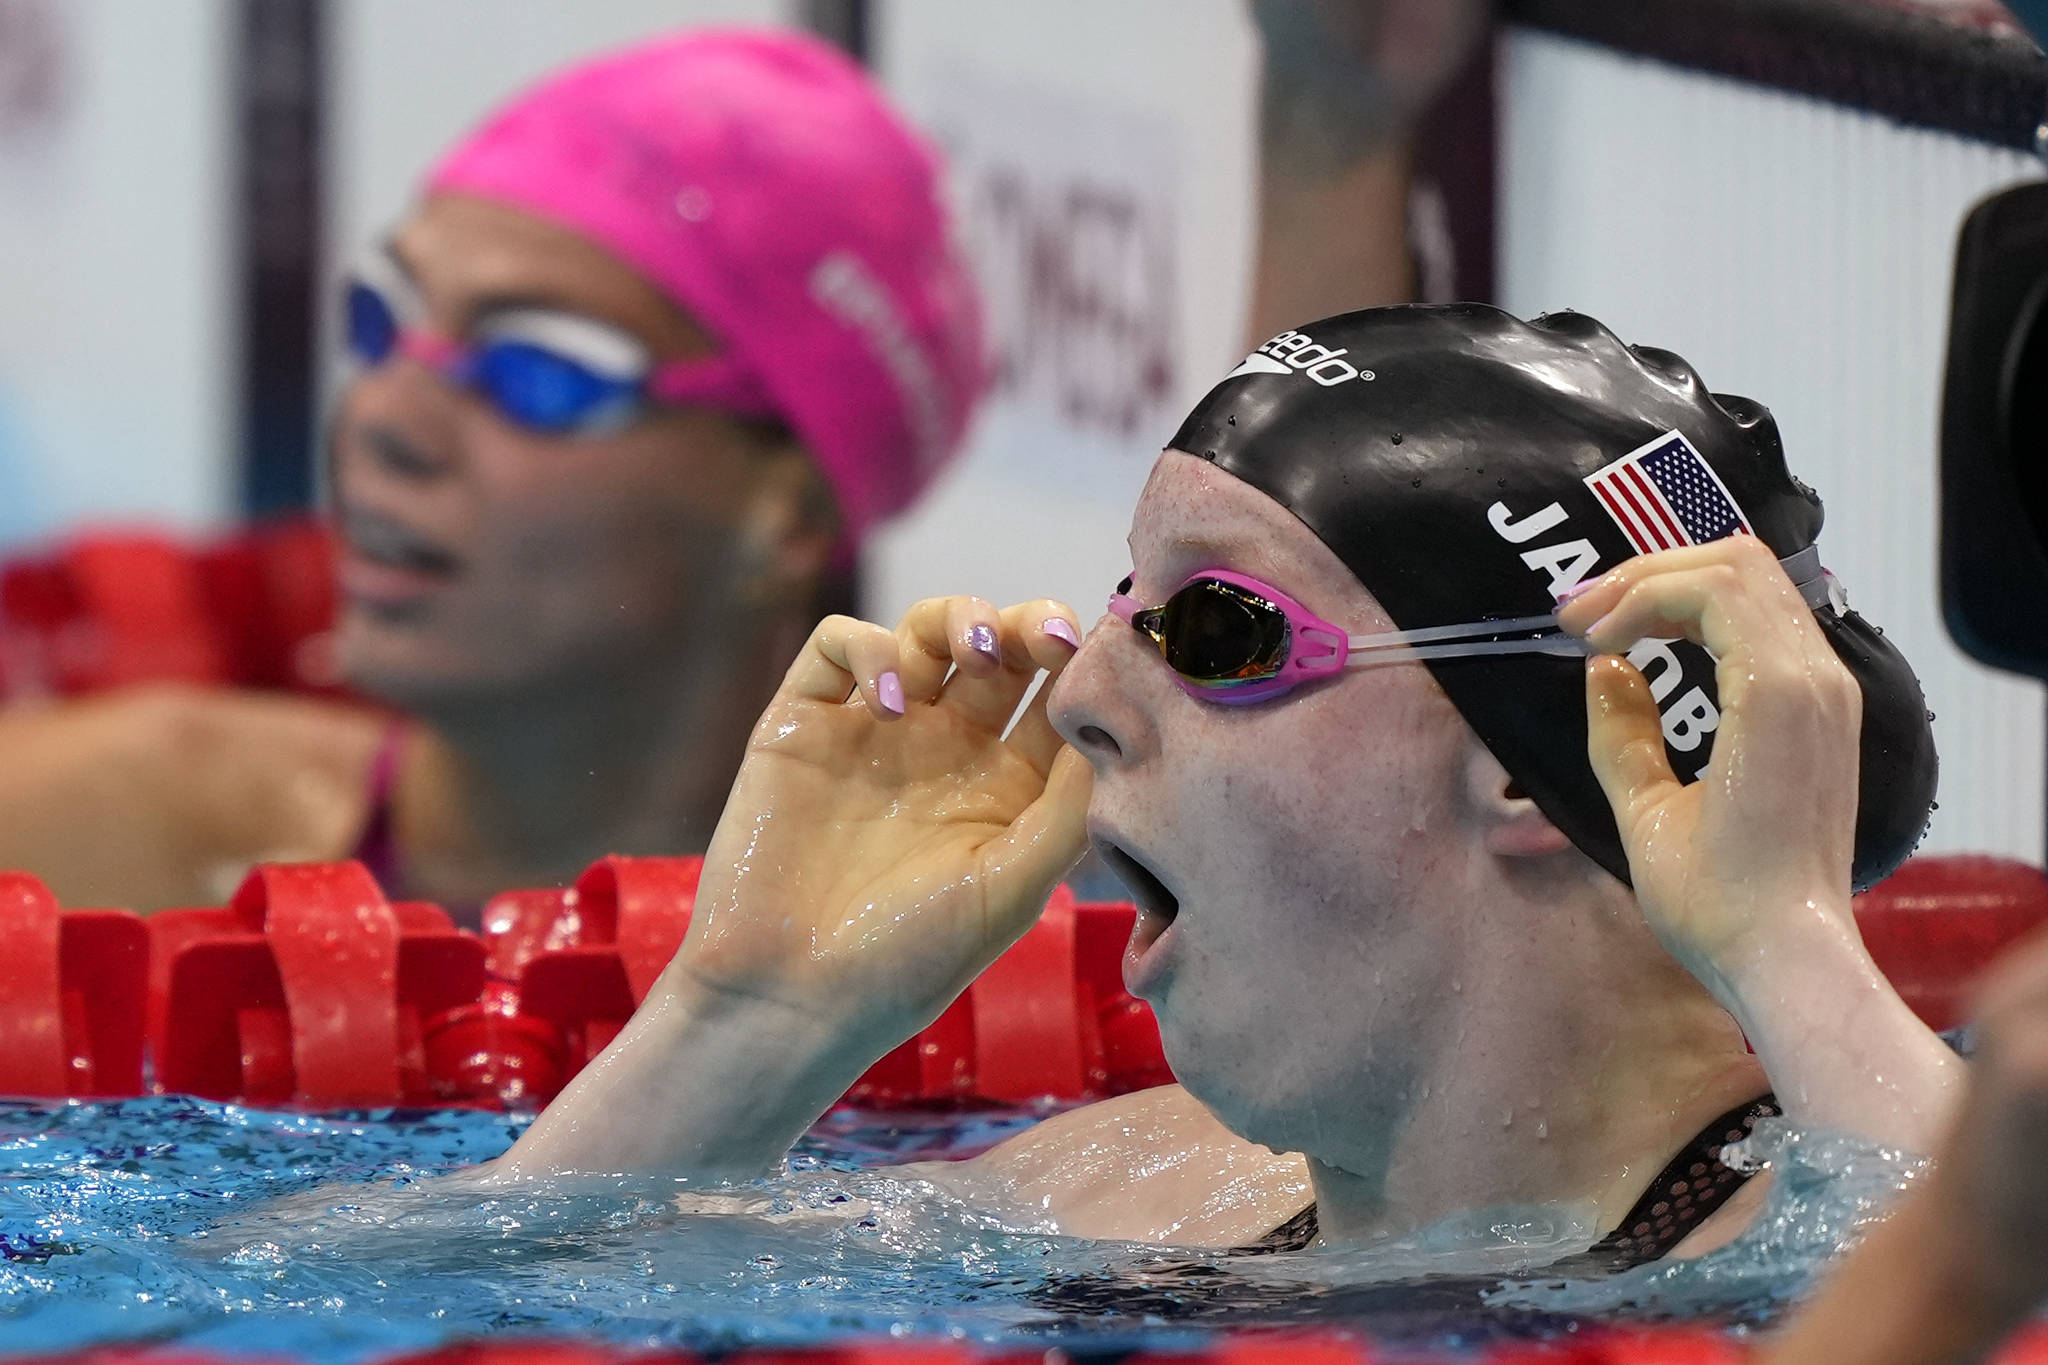 Lydia Jacoby of the United States, sees the results after winning the final of the women’s 100-meter breaststroke at the 2020 Summer Olympics, Tuesday, July 27, 2021, in Tokyo, Japan. (AP Photo / Martin Meissner)